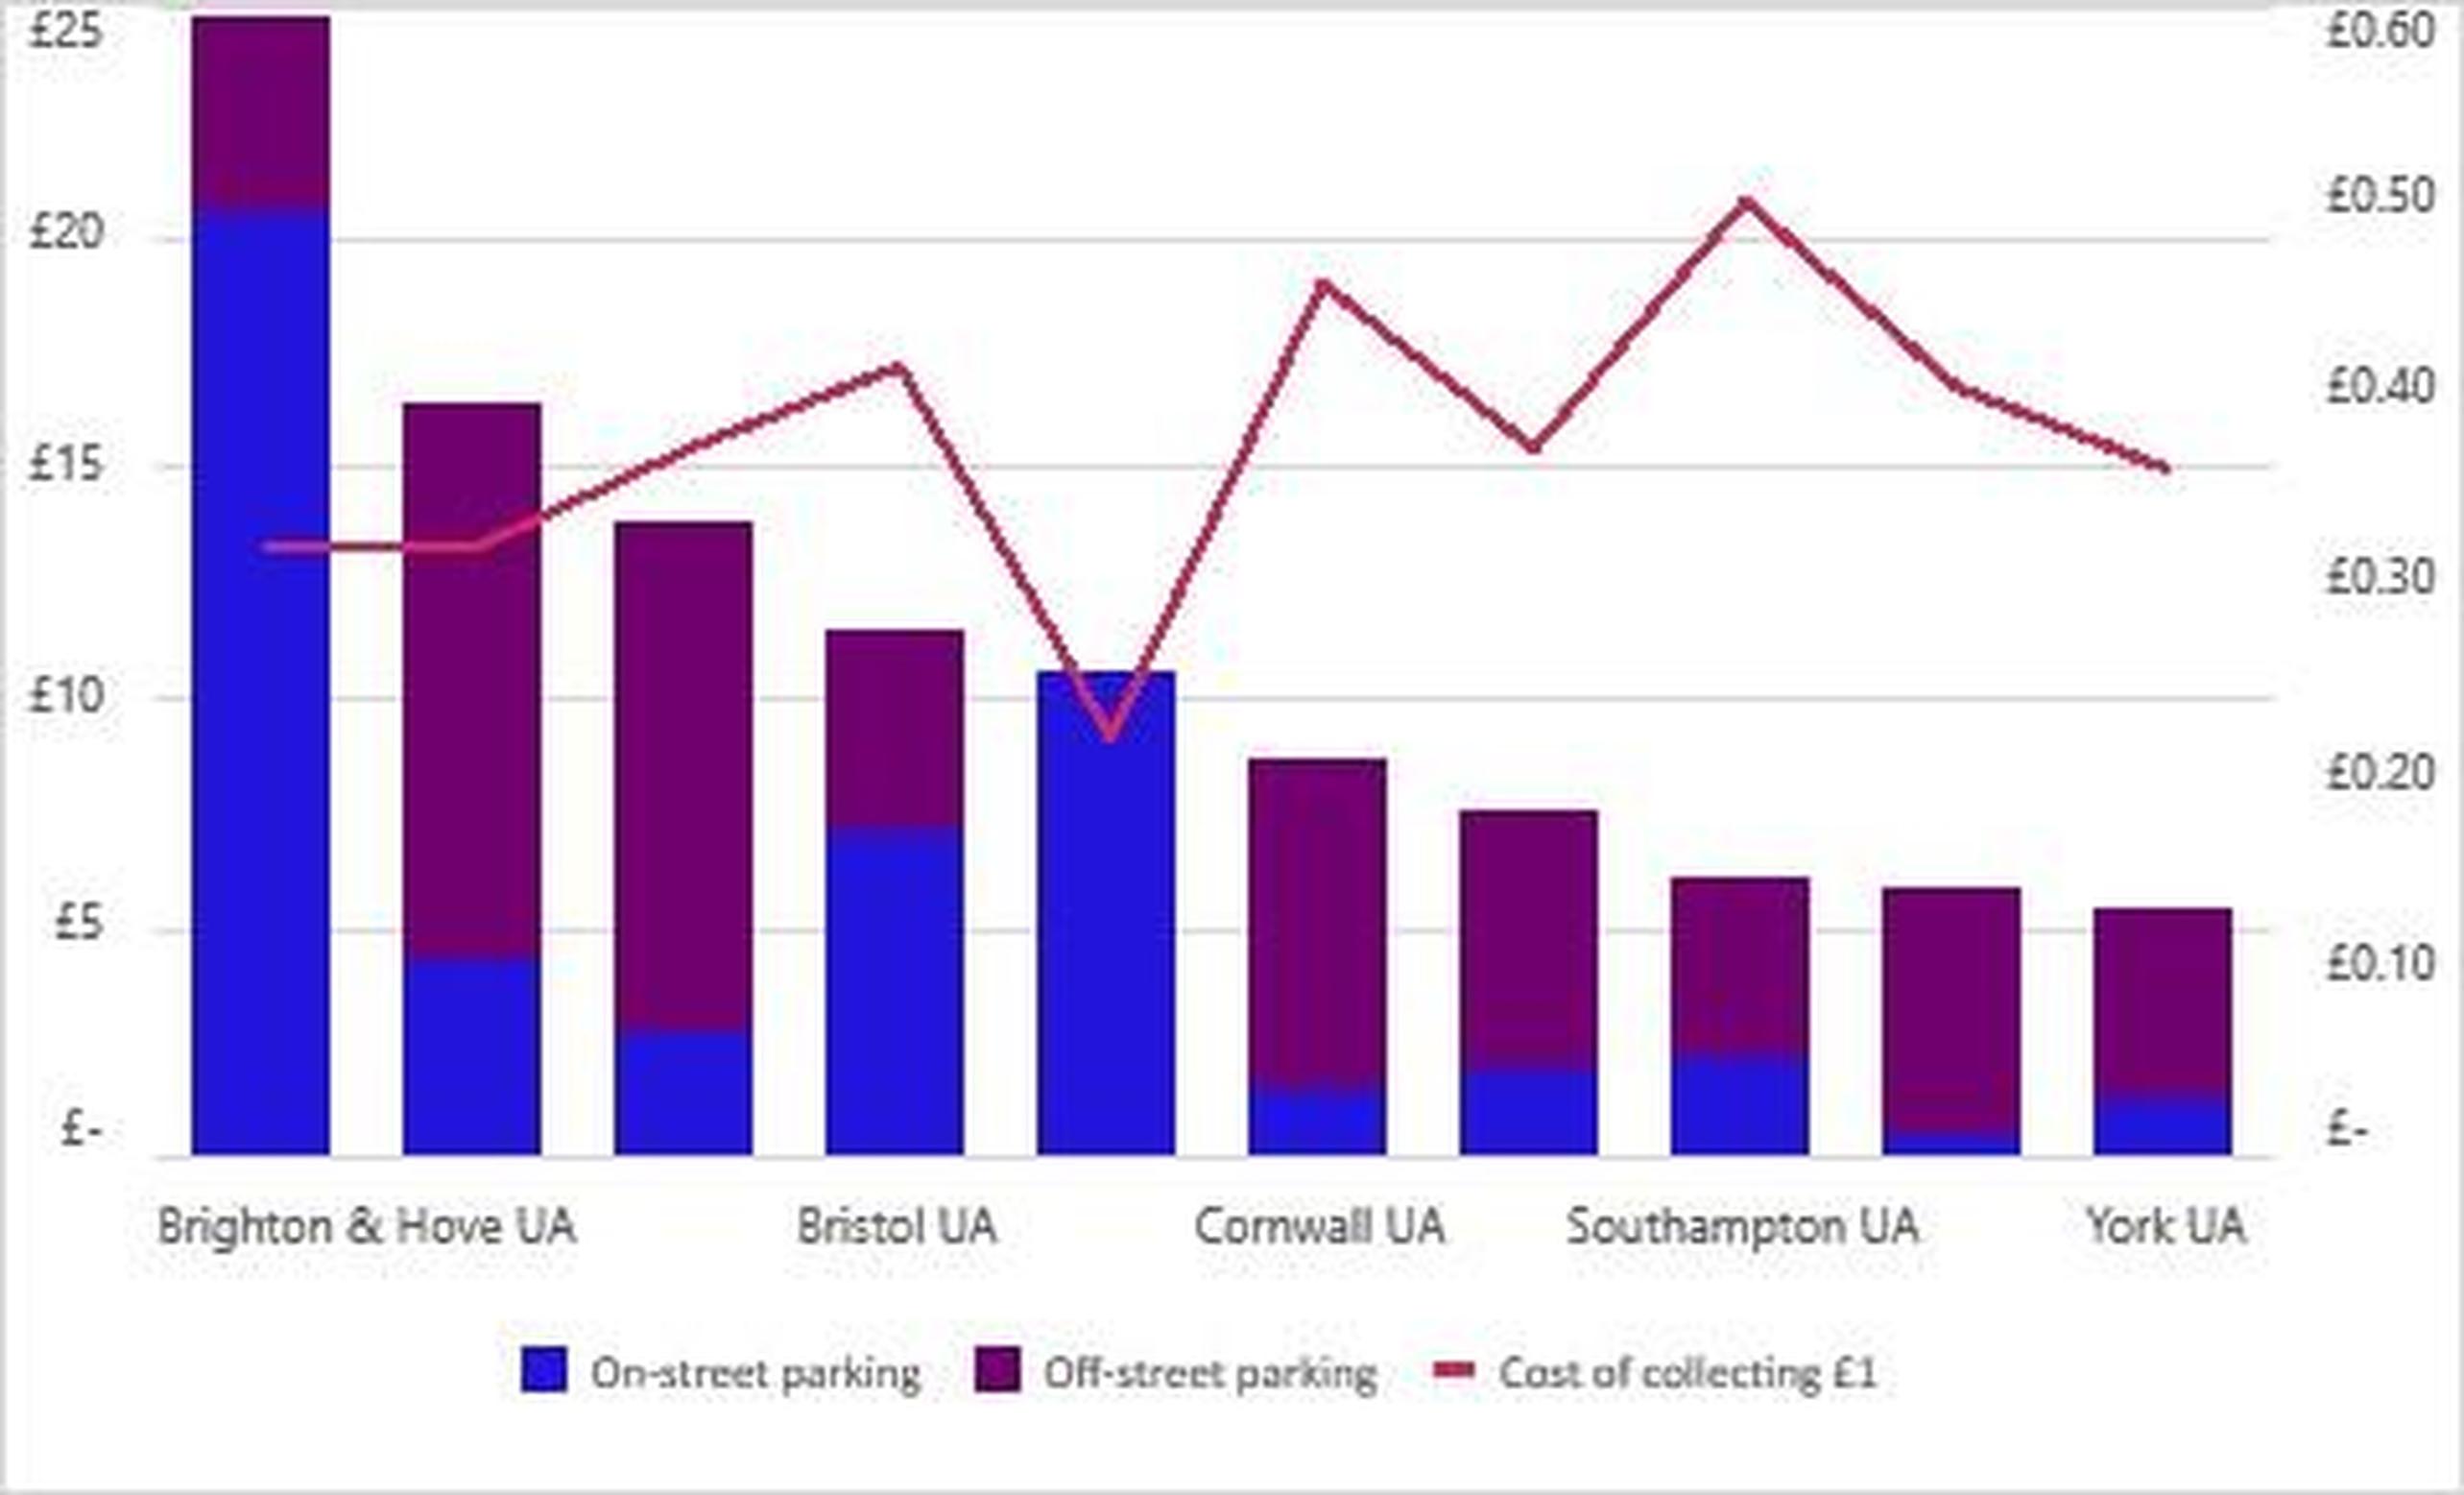 Top ten parking net-revenue earning unitary authorities
Source: Ministry of Housing, Communities and Local Government